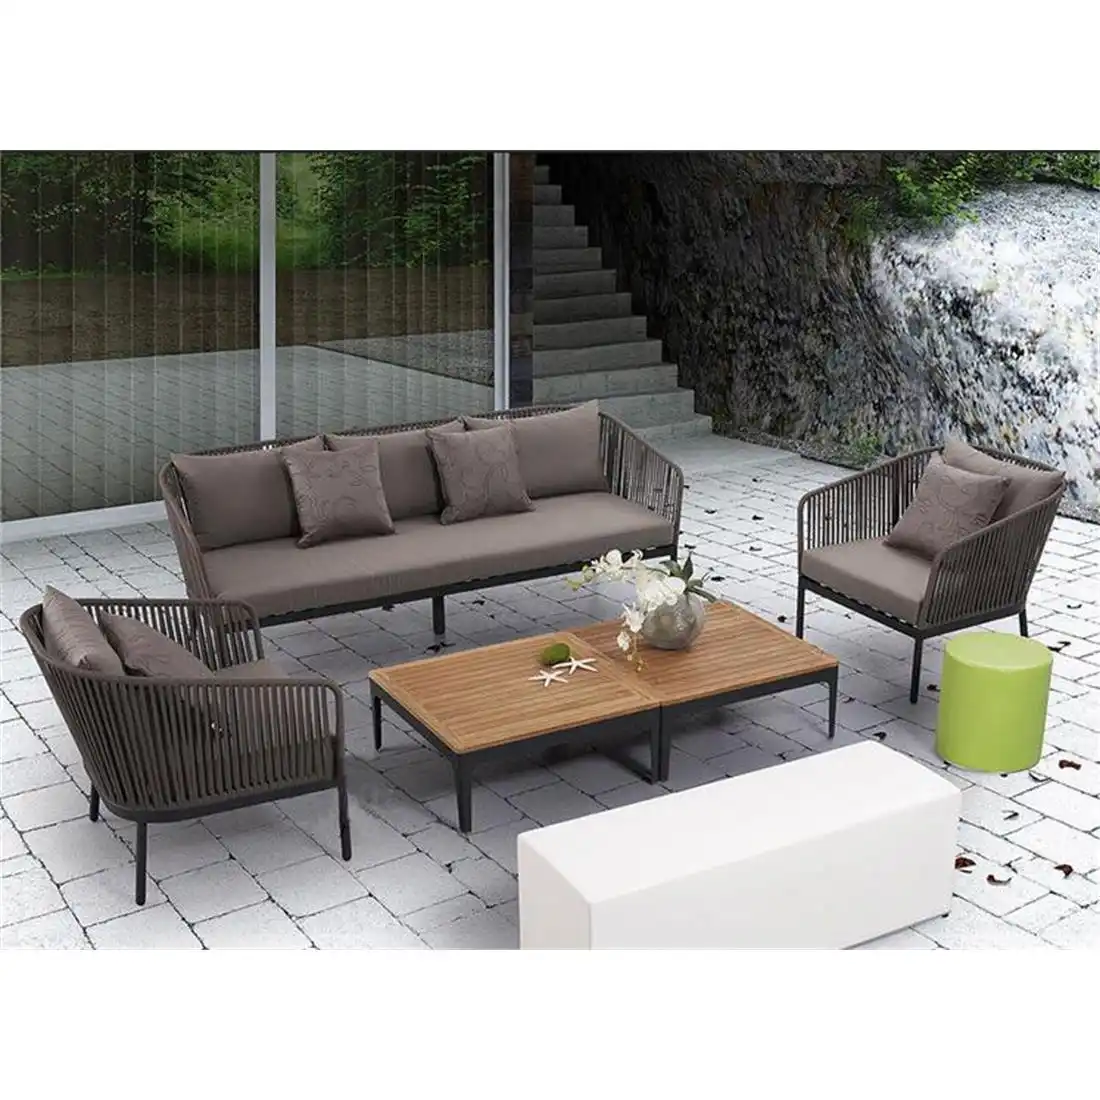 New Arrival Modern Style Outdoor Furniture Sets Ratan Rope Patio Furniture Garden Sofas